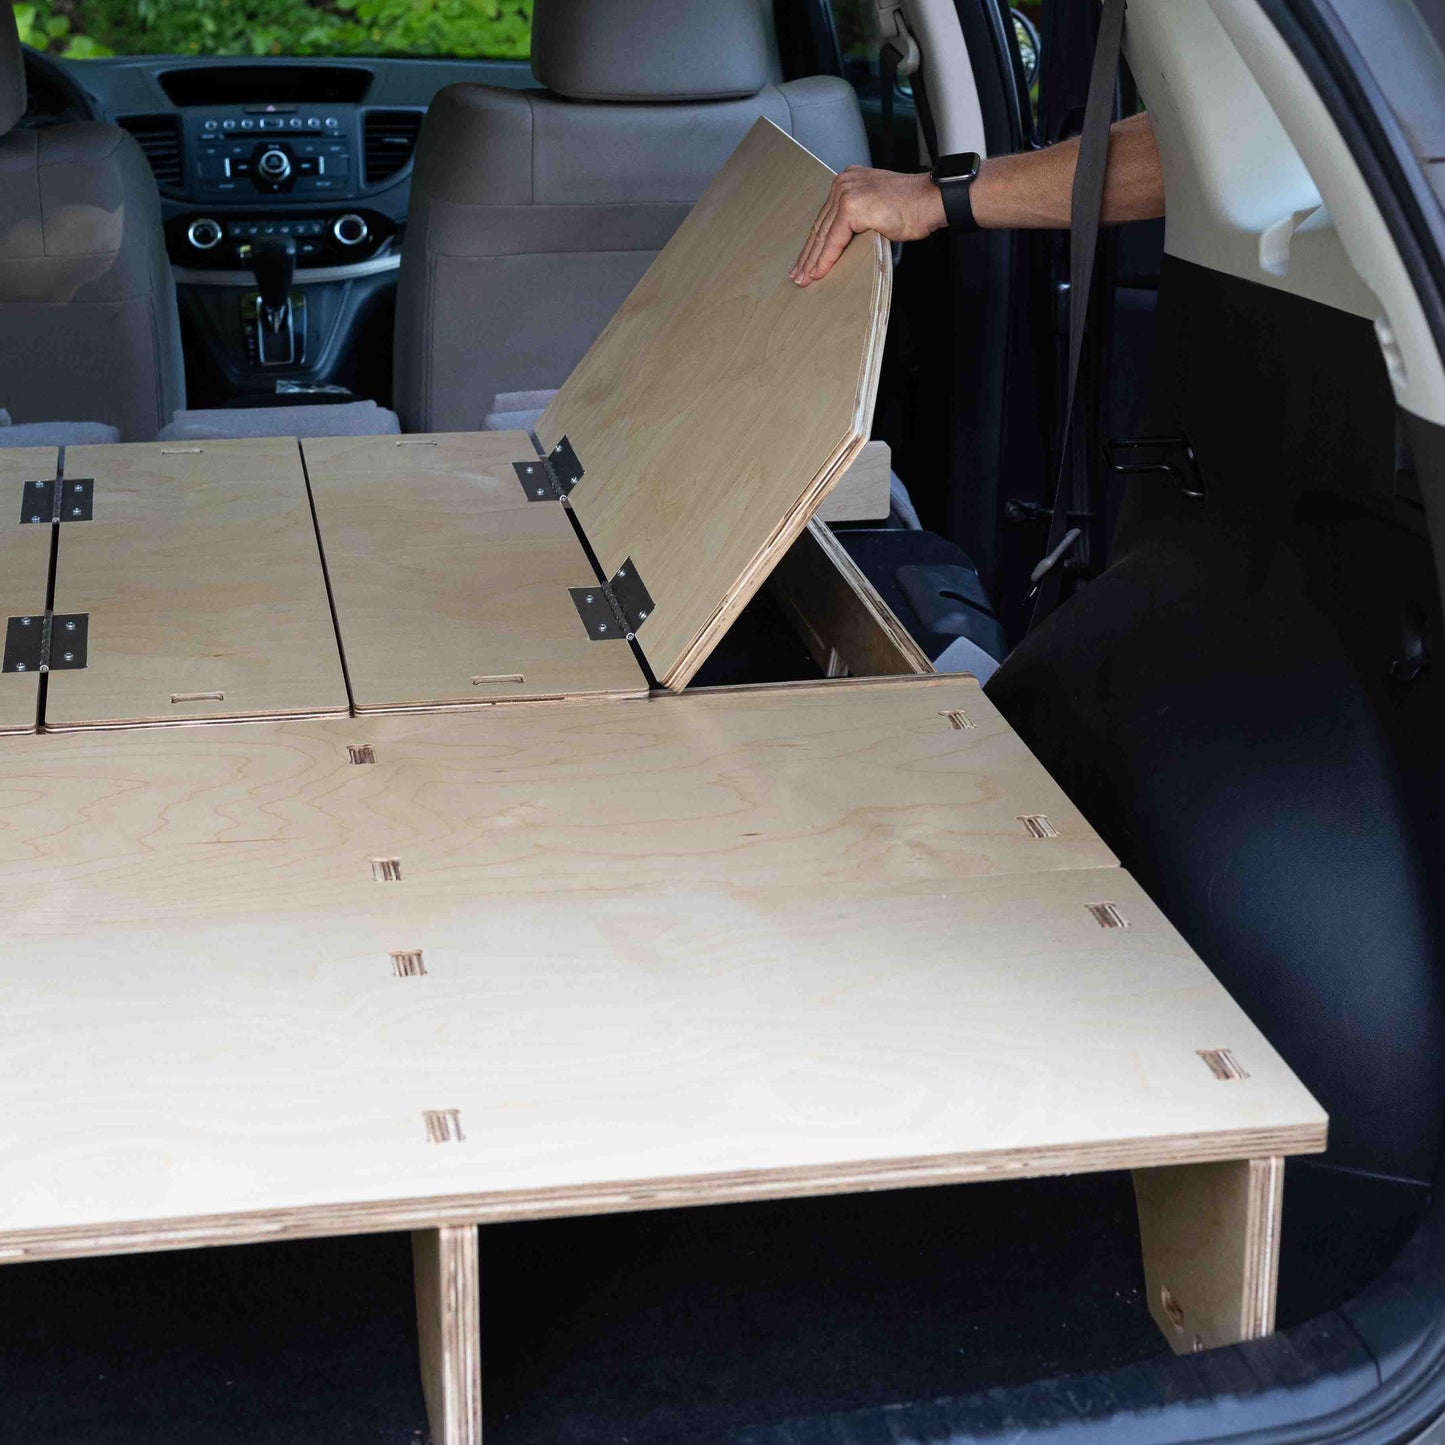 A person putting a CarToCamp sleeping platform in the trunk of a car.